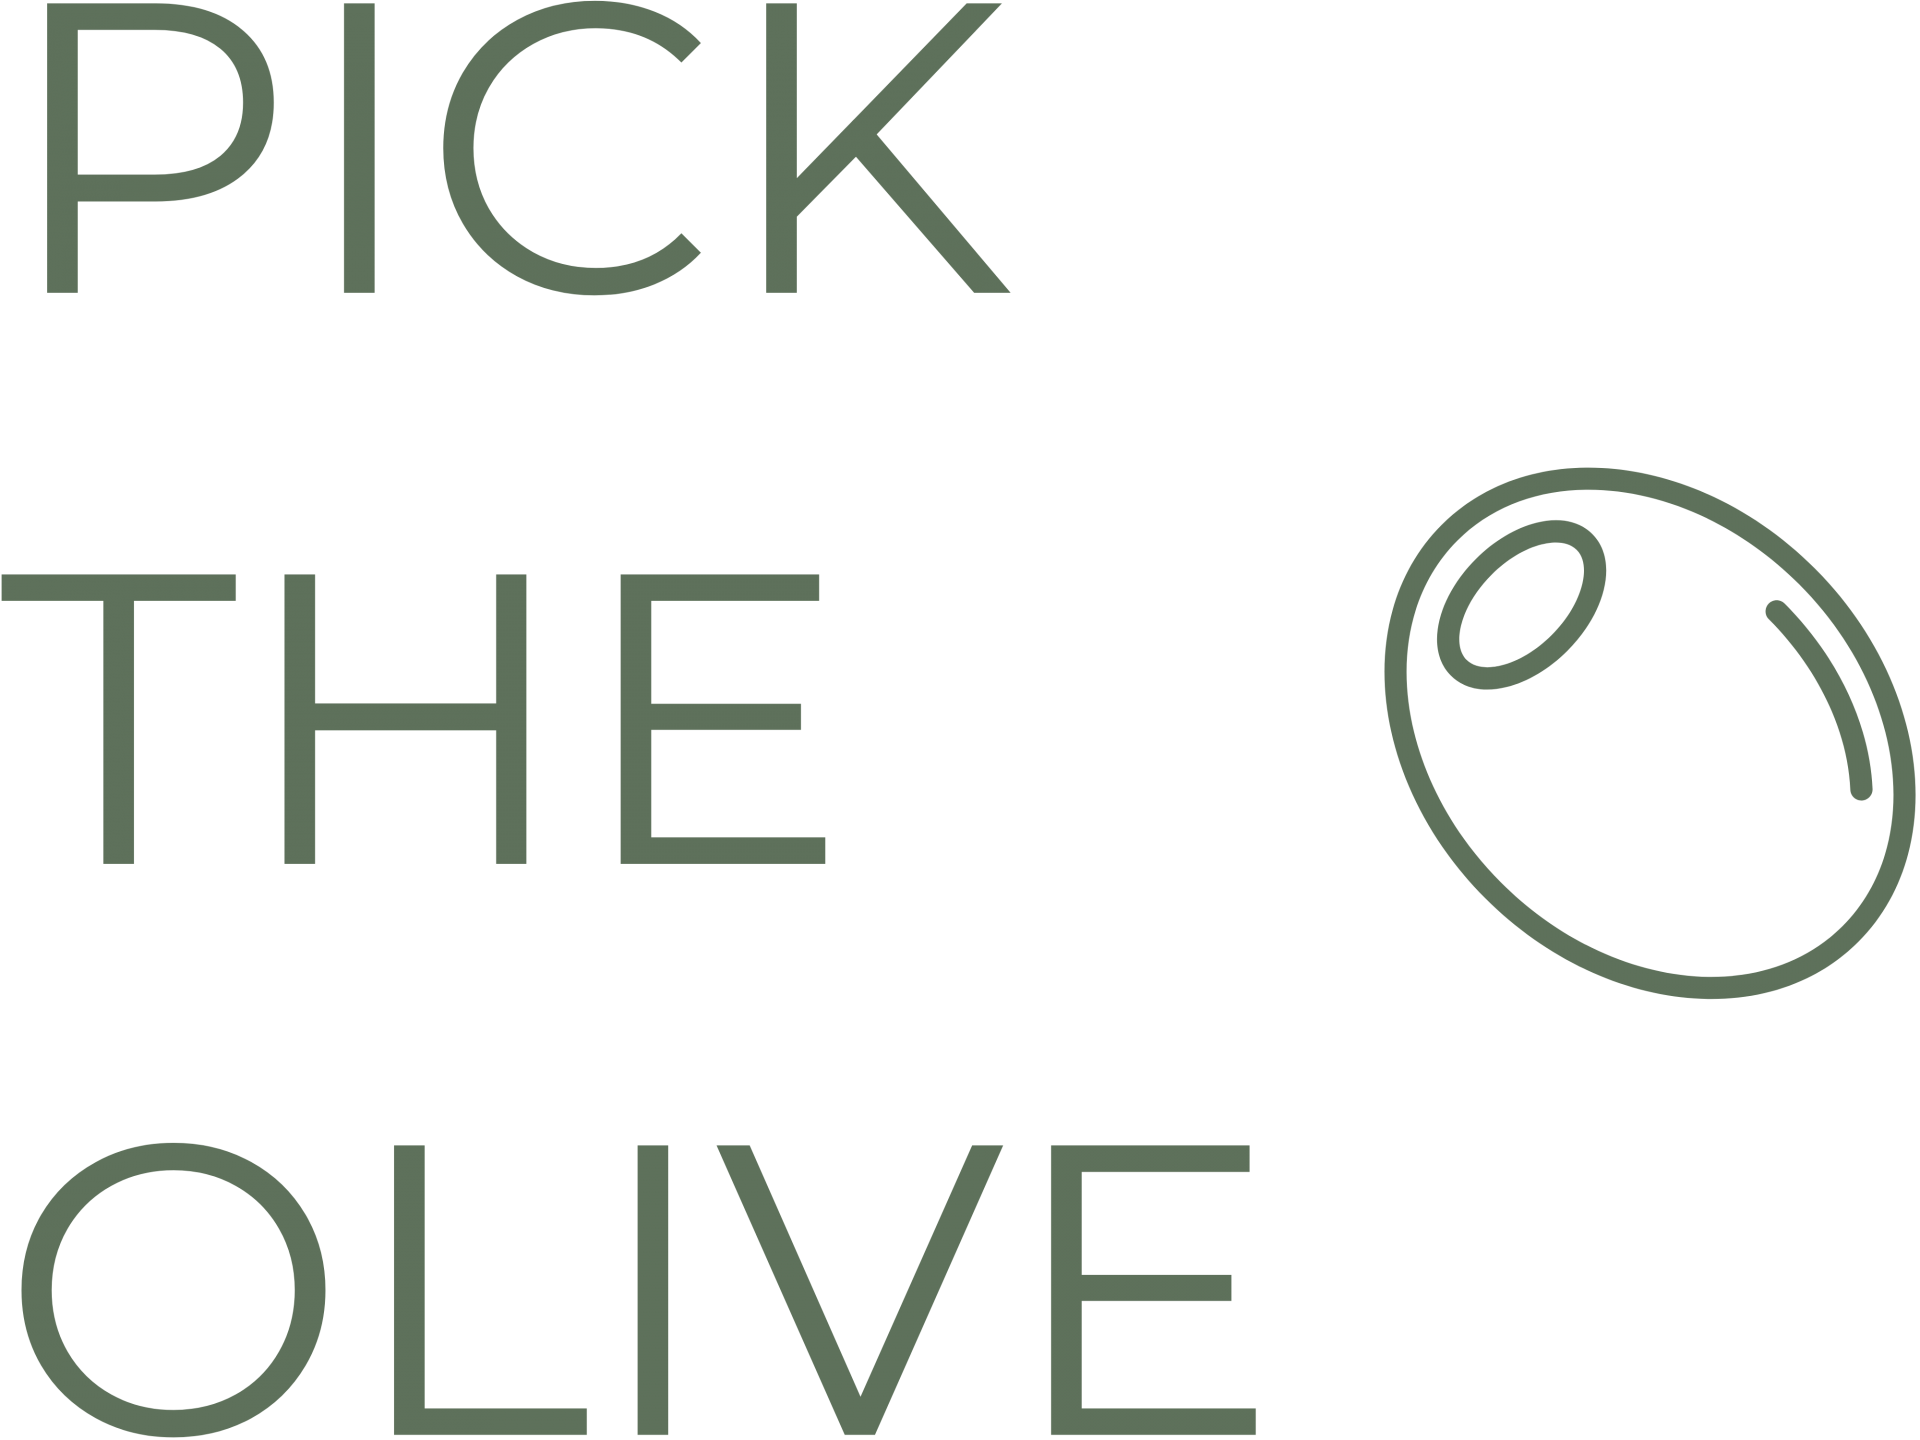 Pick the Olive